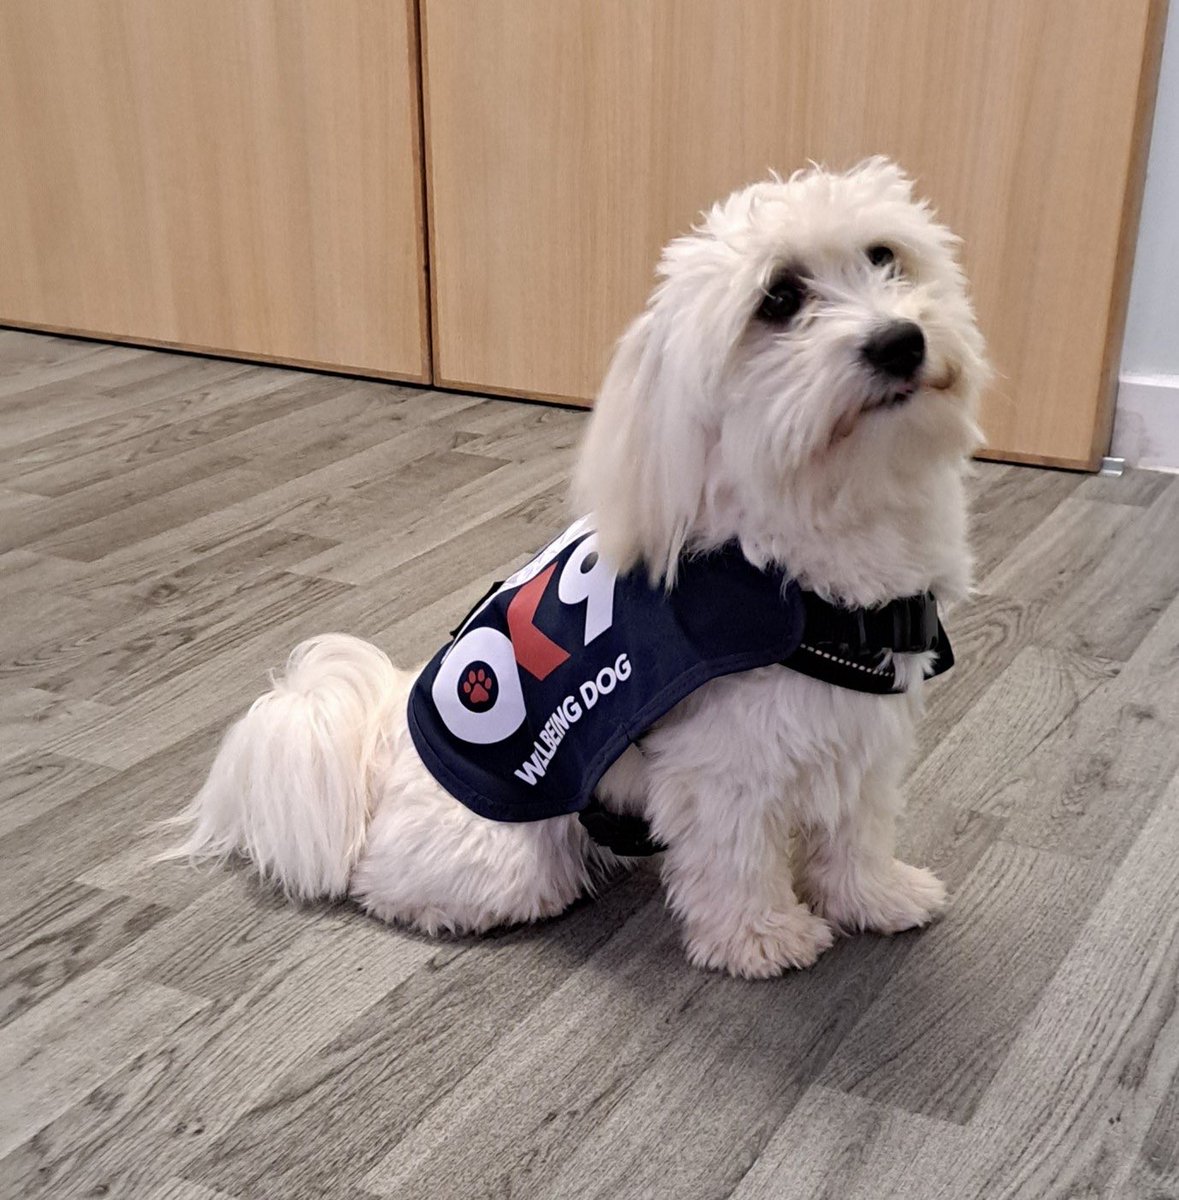 Meet Mutley! Please welcome this little lad who is ready to bring a huge amount of ❤️ to our hardworking colleagues at @bedspolice as the new @OscarKiloUK Wellbeing Dog! Look out for him or request a visit is the Wellbeing Team. 🥰👍😊🐾 #wellbeing #dogs @MatWaters587400 #dog